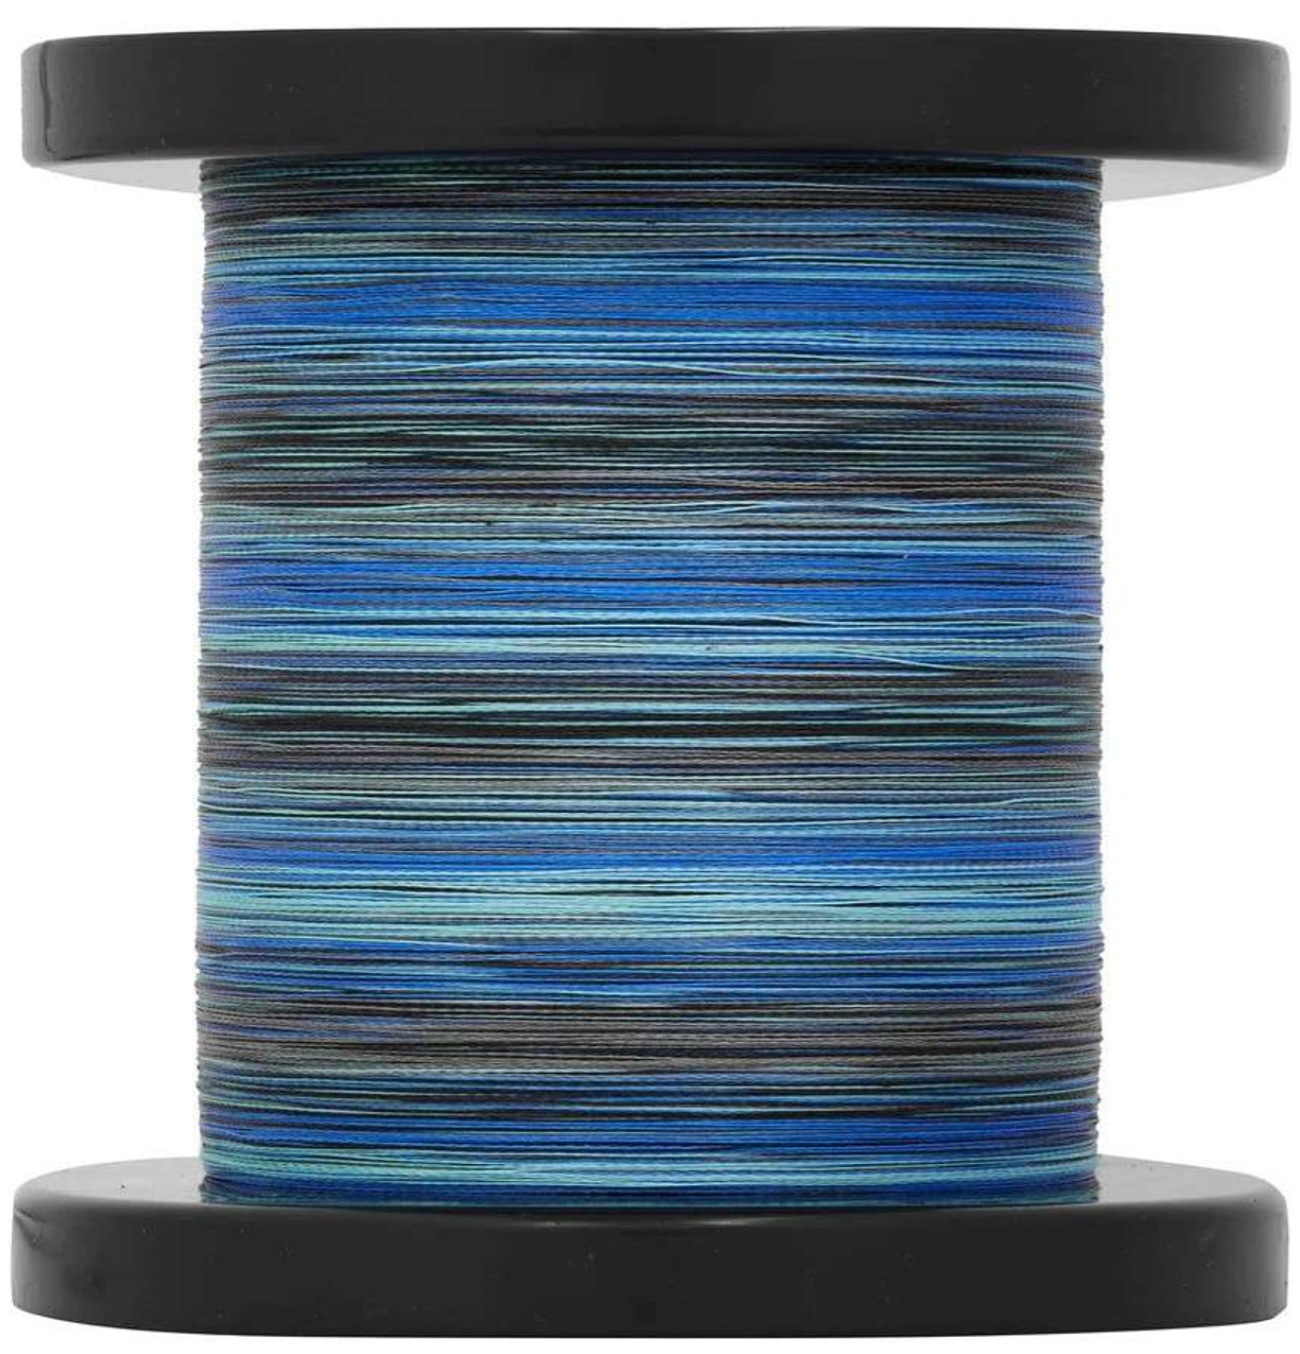 Nomad Design Panderra X4 Braided Line (Assorted Sizes, 3000yd, Multicolor)